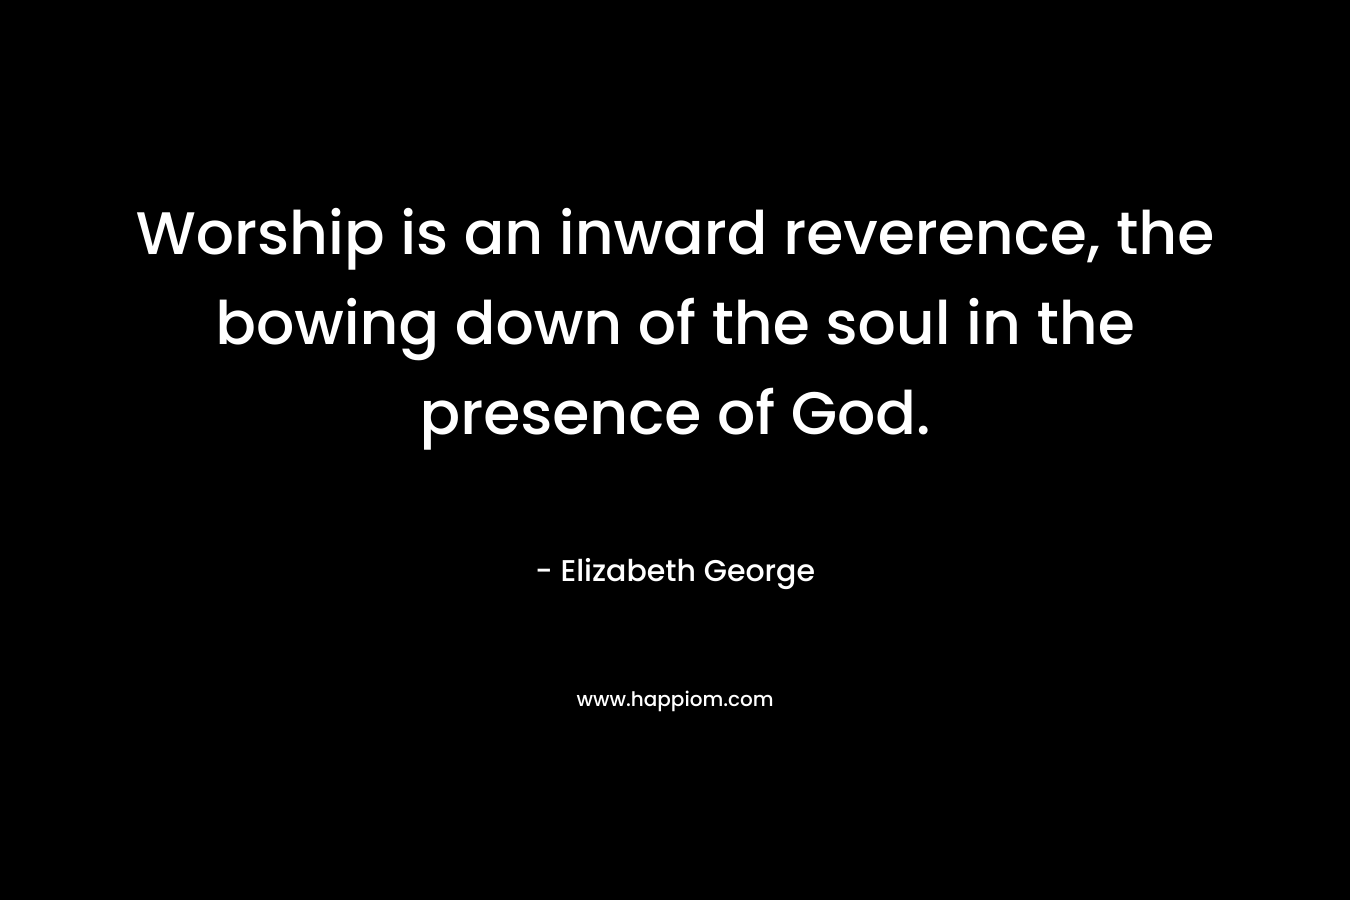 Worship is an inward reverence, the bowing down of the soul in the presence of God. – Elizabeth George